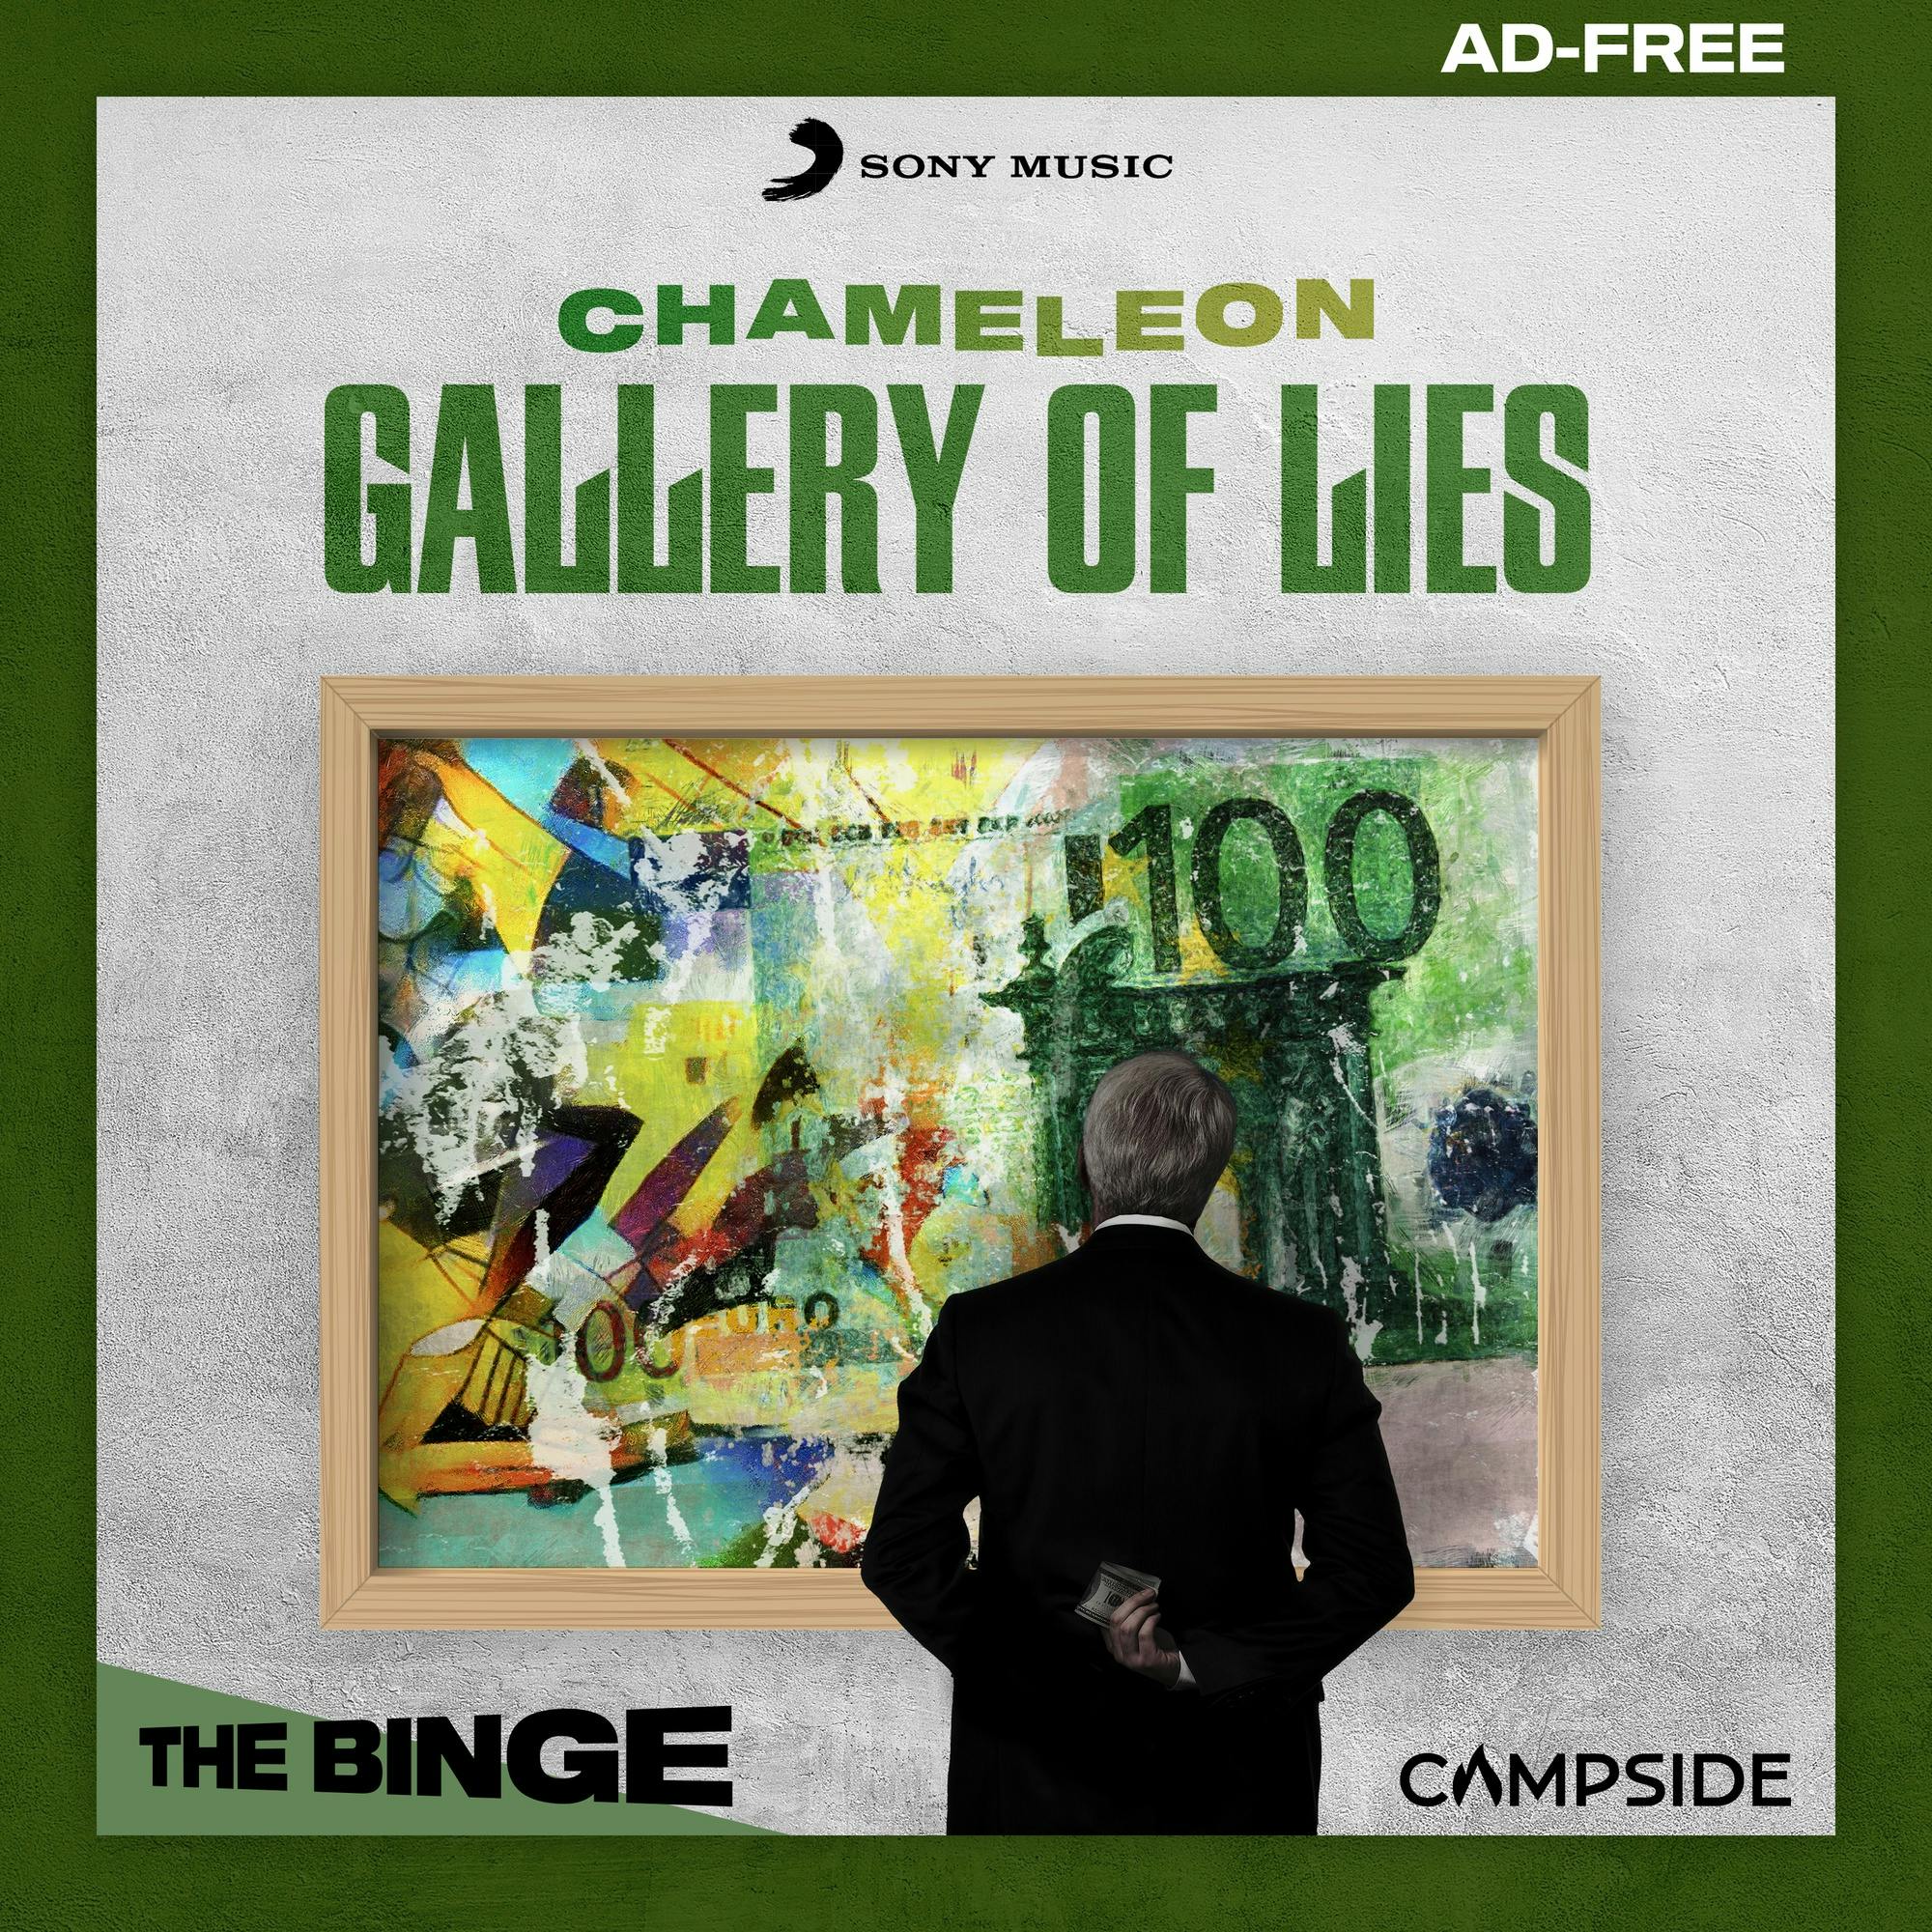 Chameleon: Gallery of Lies (Ad-Free, THE BINGE) podcast tile